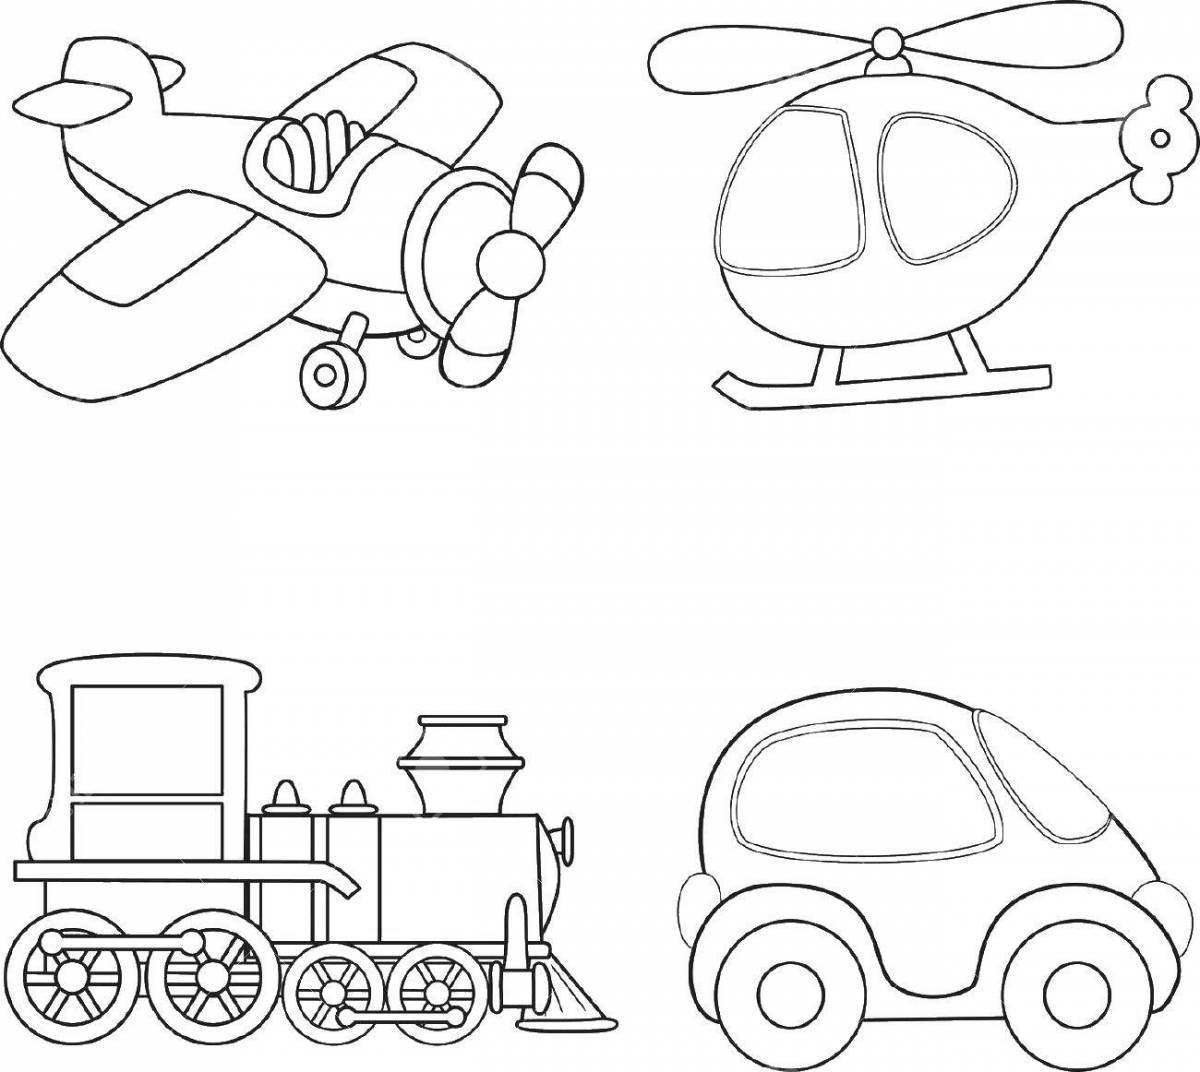 Fun transport coloring book for toddlers 2-3 years old